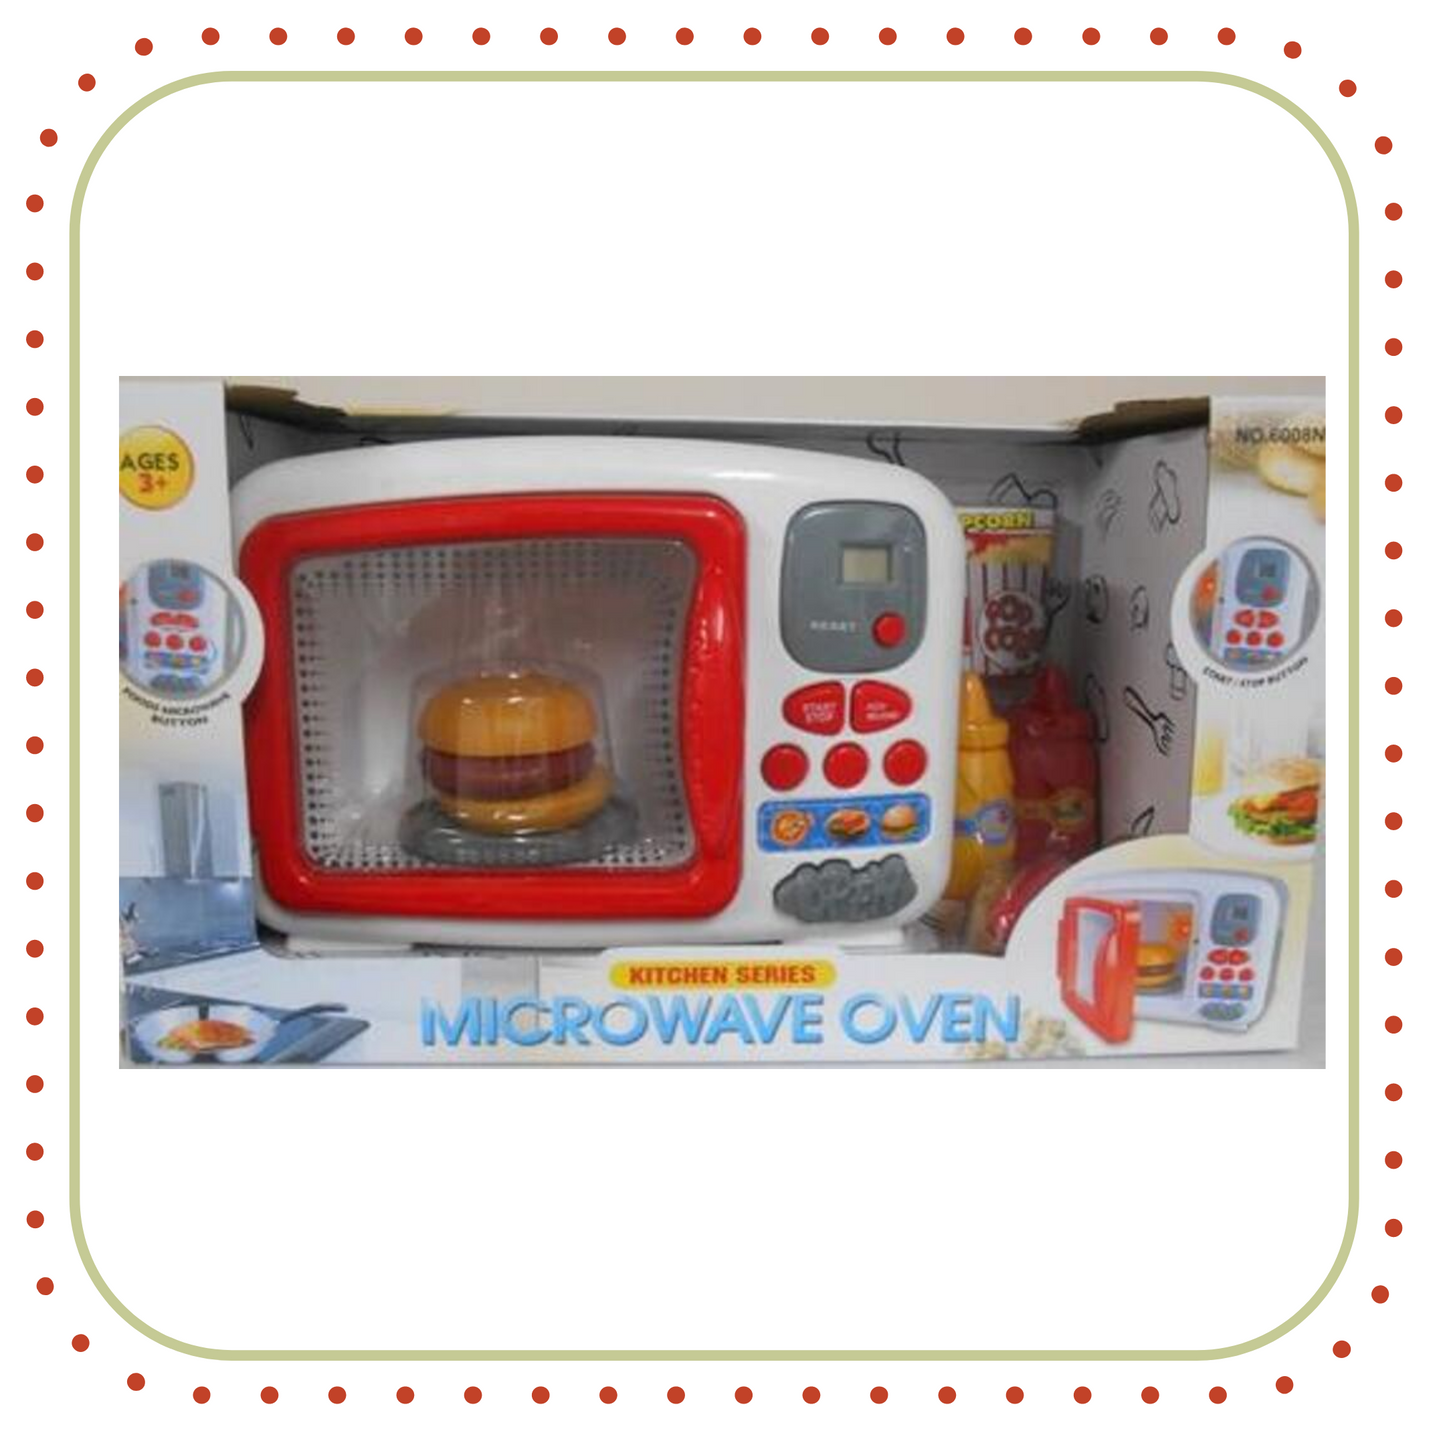 Pretend Play Microwave Oven